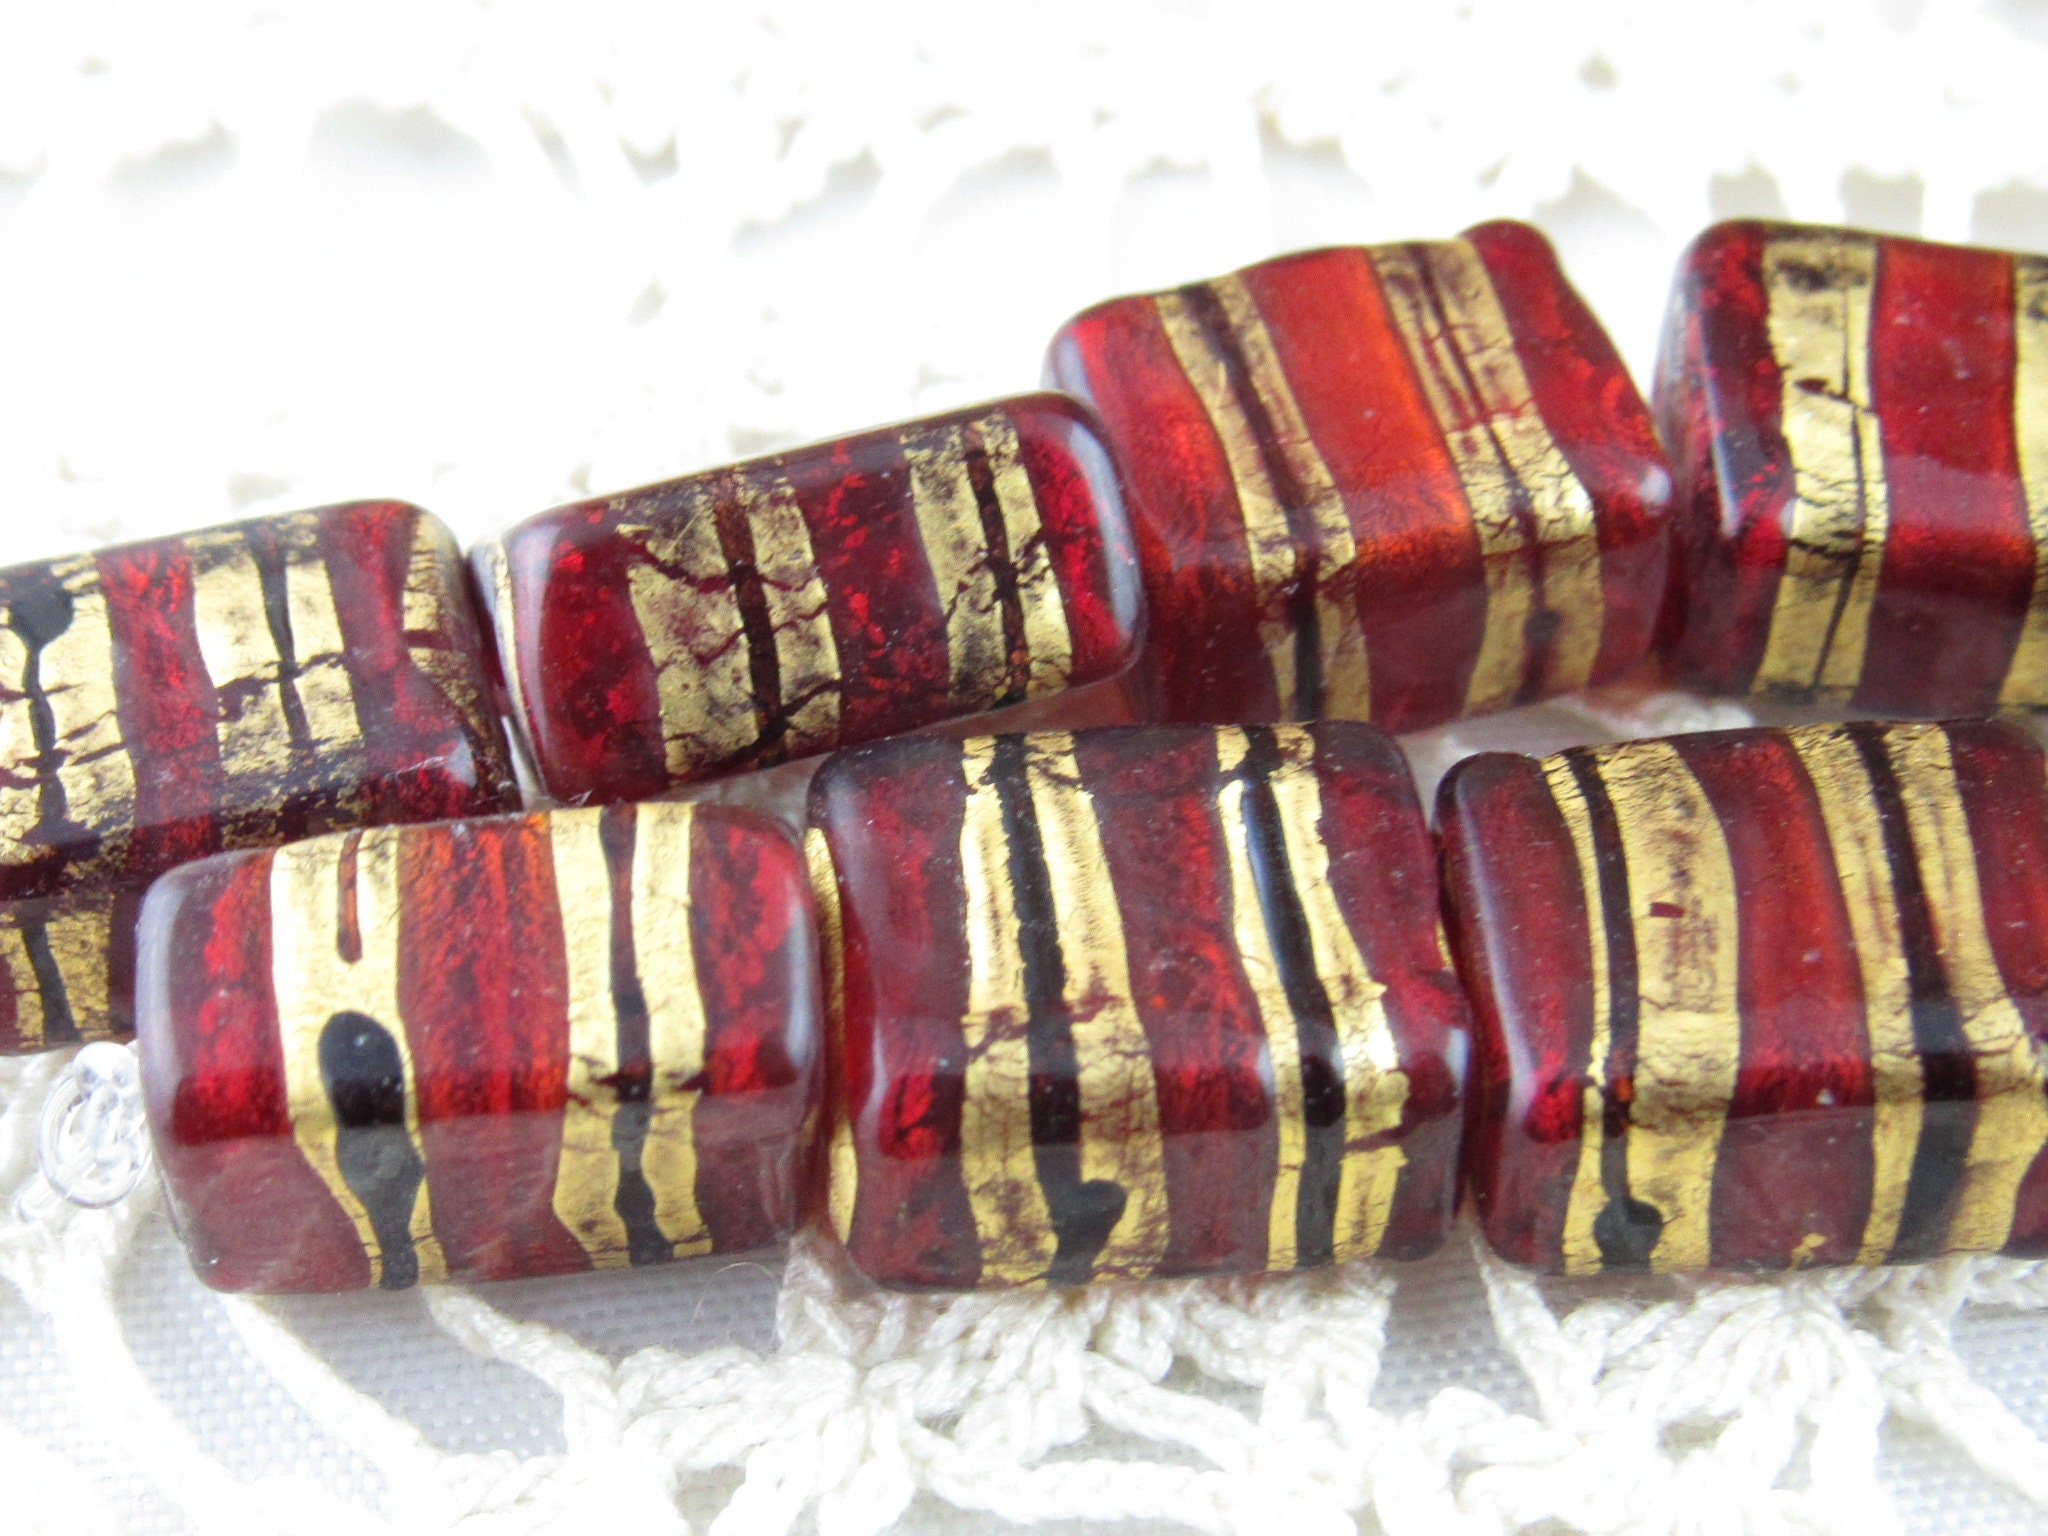 NEW 6/oz Glass Stone Red/cranberry Mixed Loose Lot of Beads